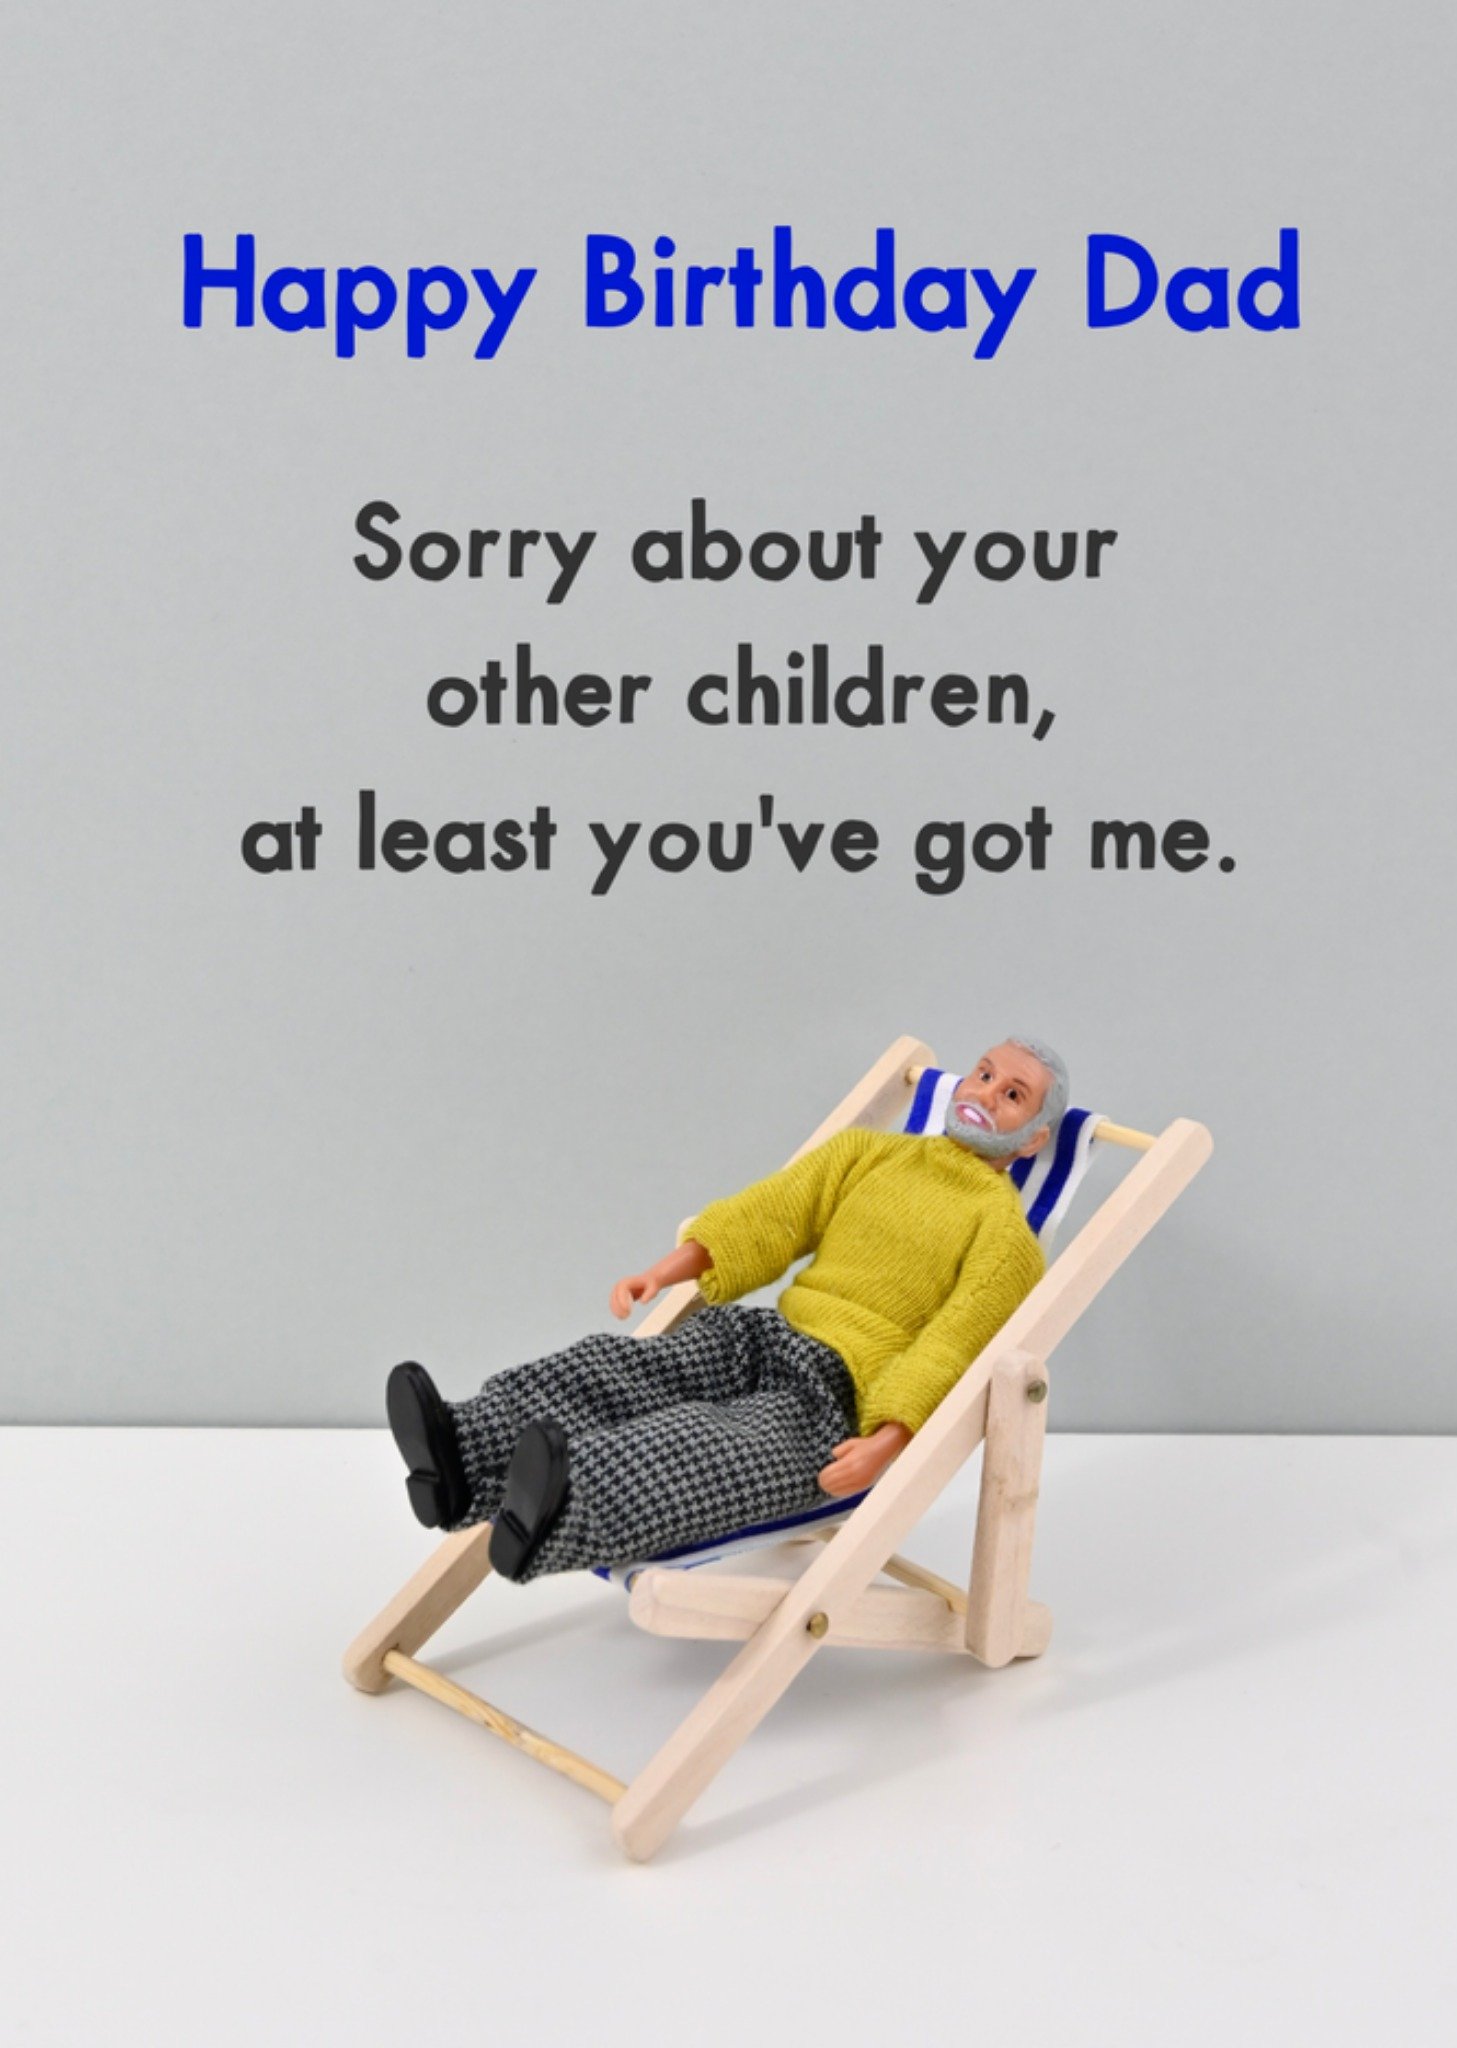 Moonpig Dad Sorry About Your Other Children At Least You've Got Me Deckchair Happy Birthday Card Eca